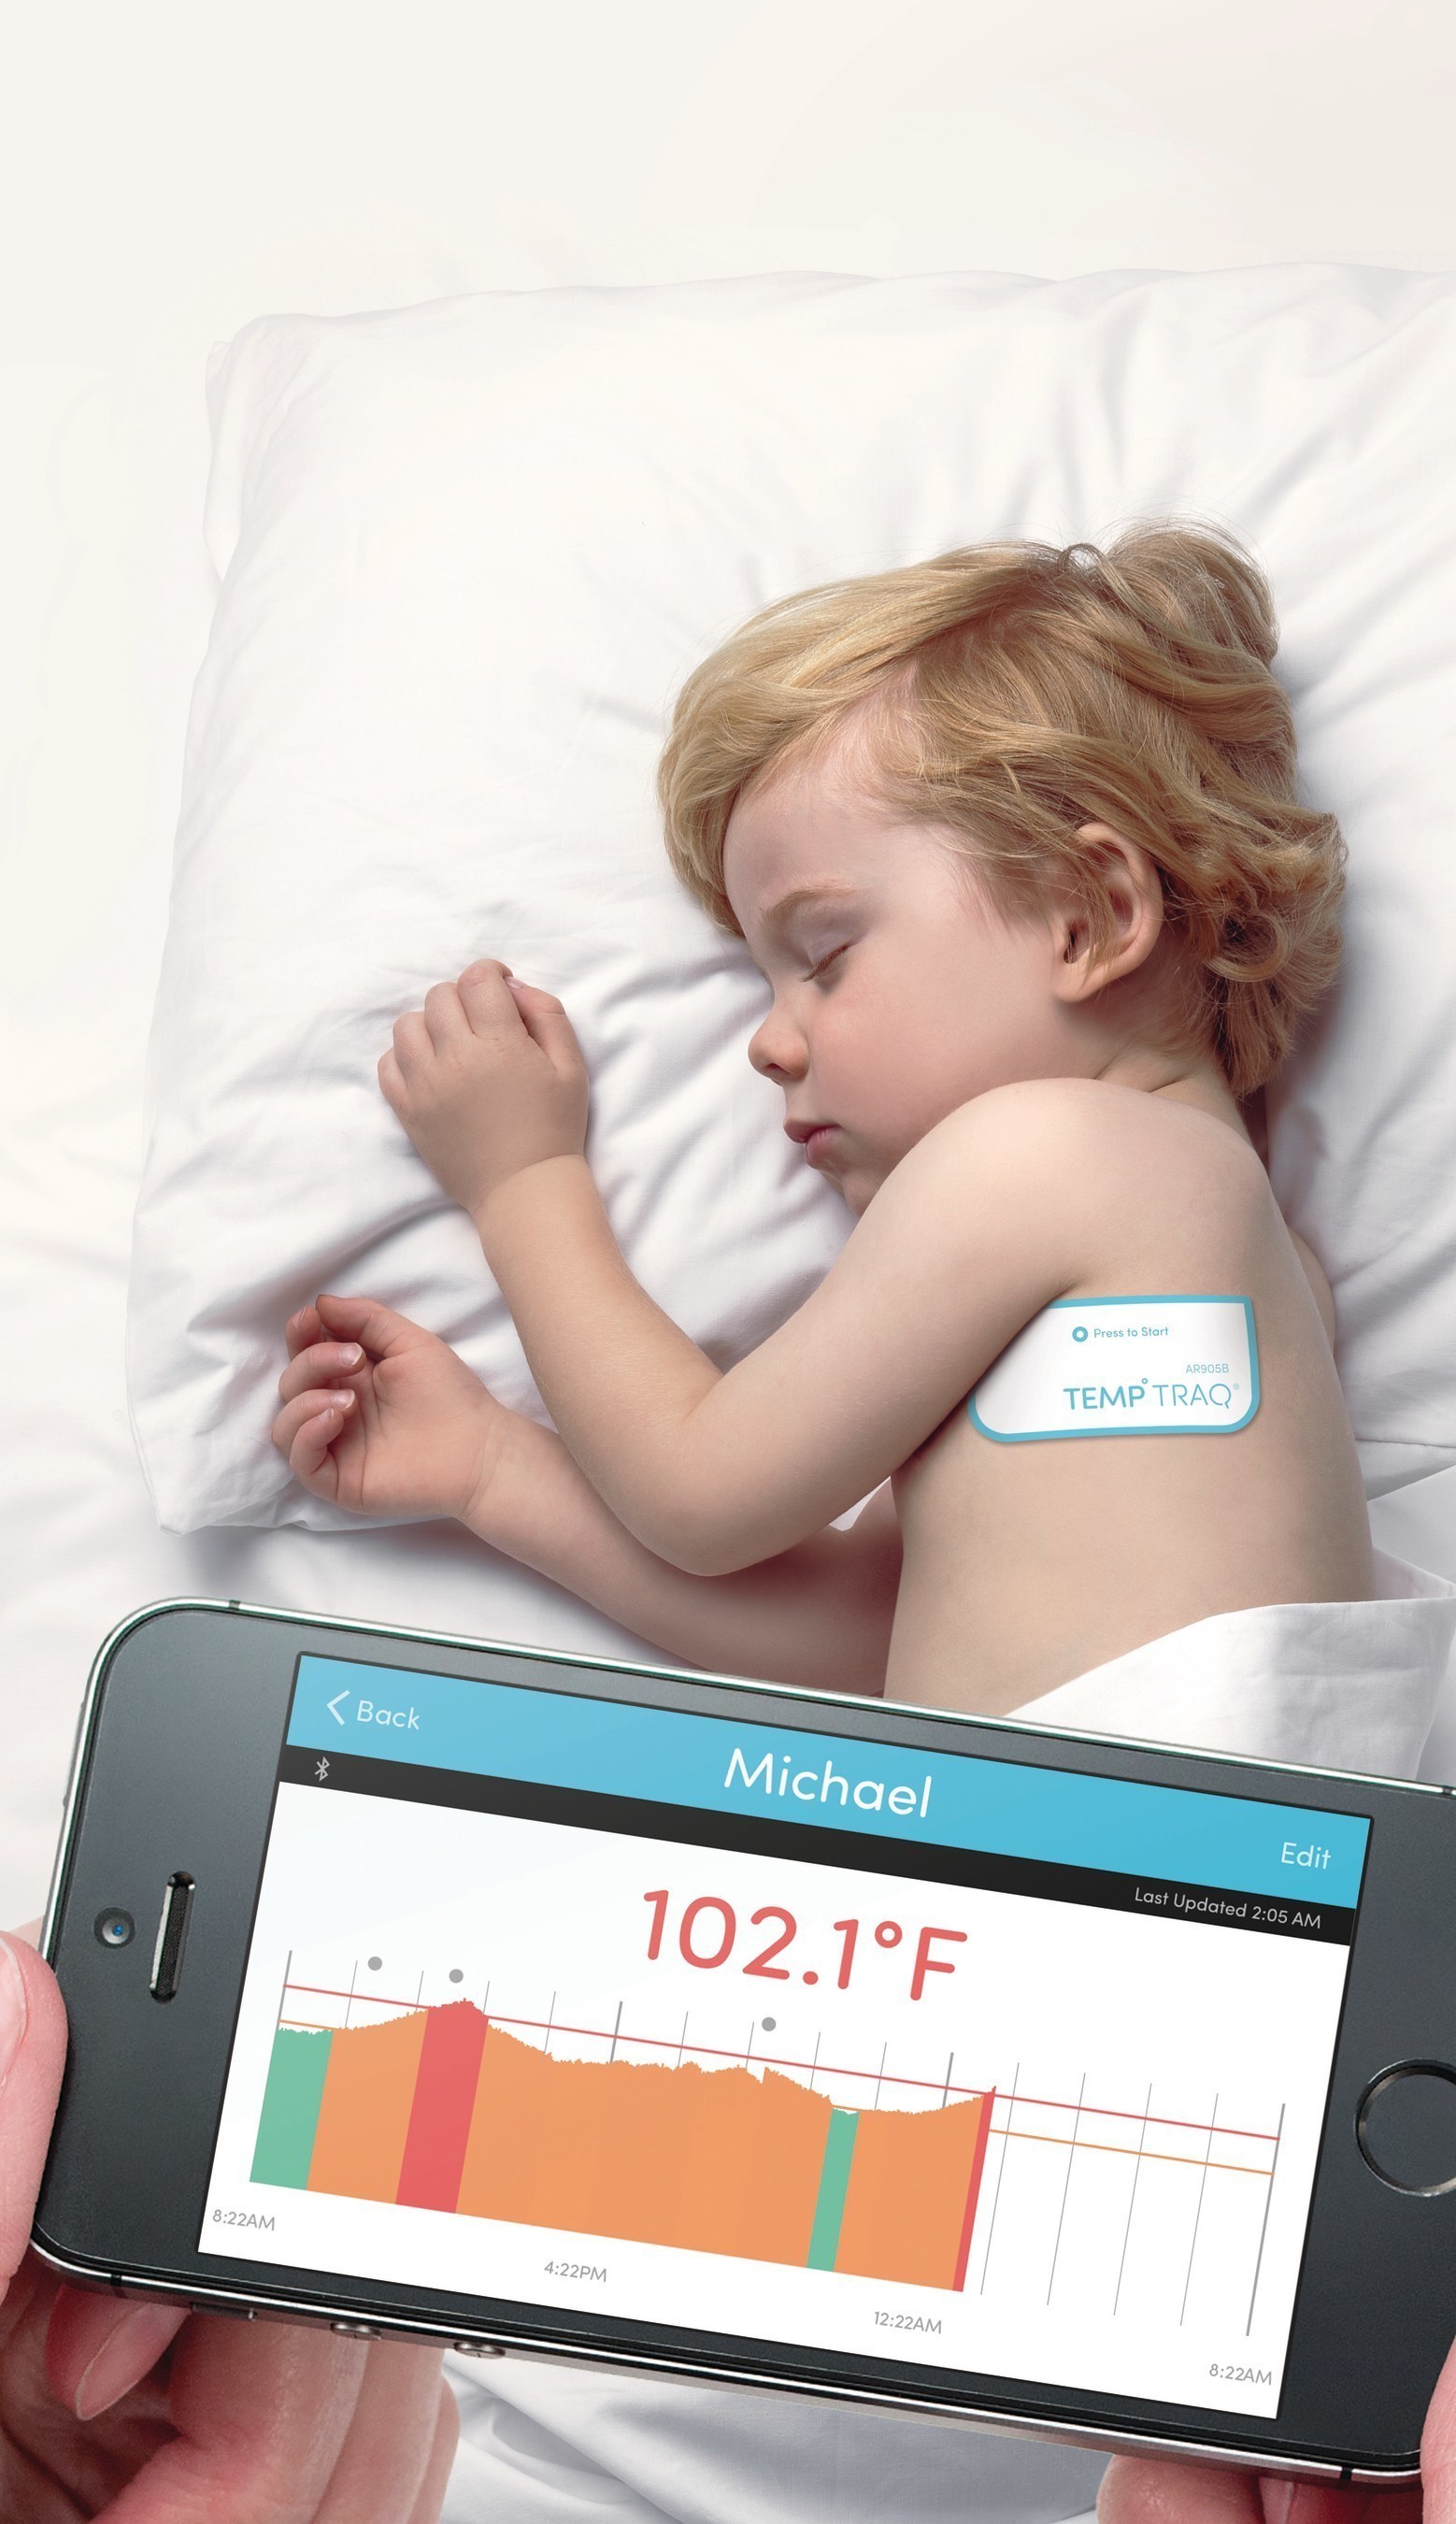 Now Available at Target, CVS and Walgreens Stores: TempTraq(R) Wearable Bluetooth(R) Temperature Monitor and App Give Parents, and Caregivers, Peace of Mind